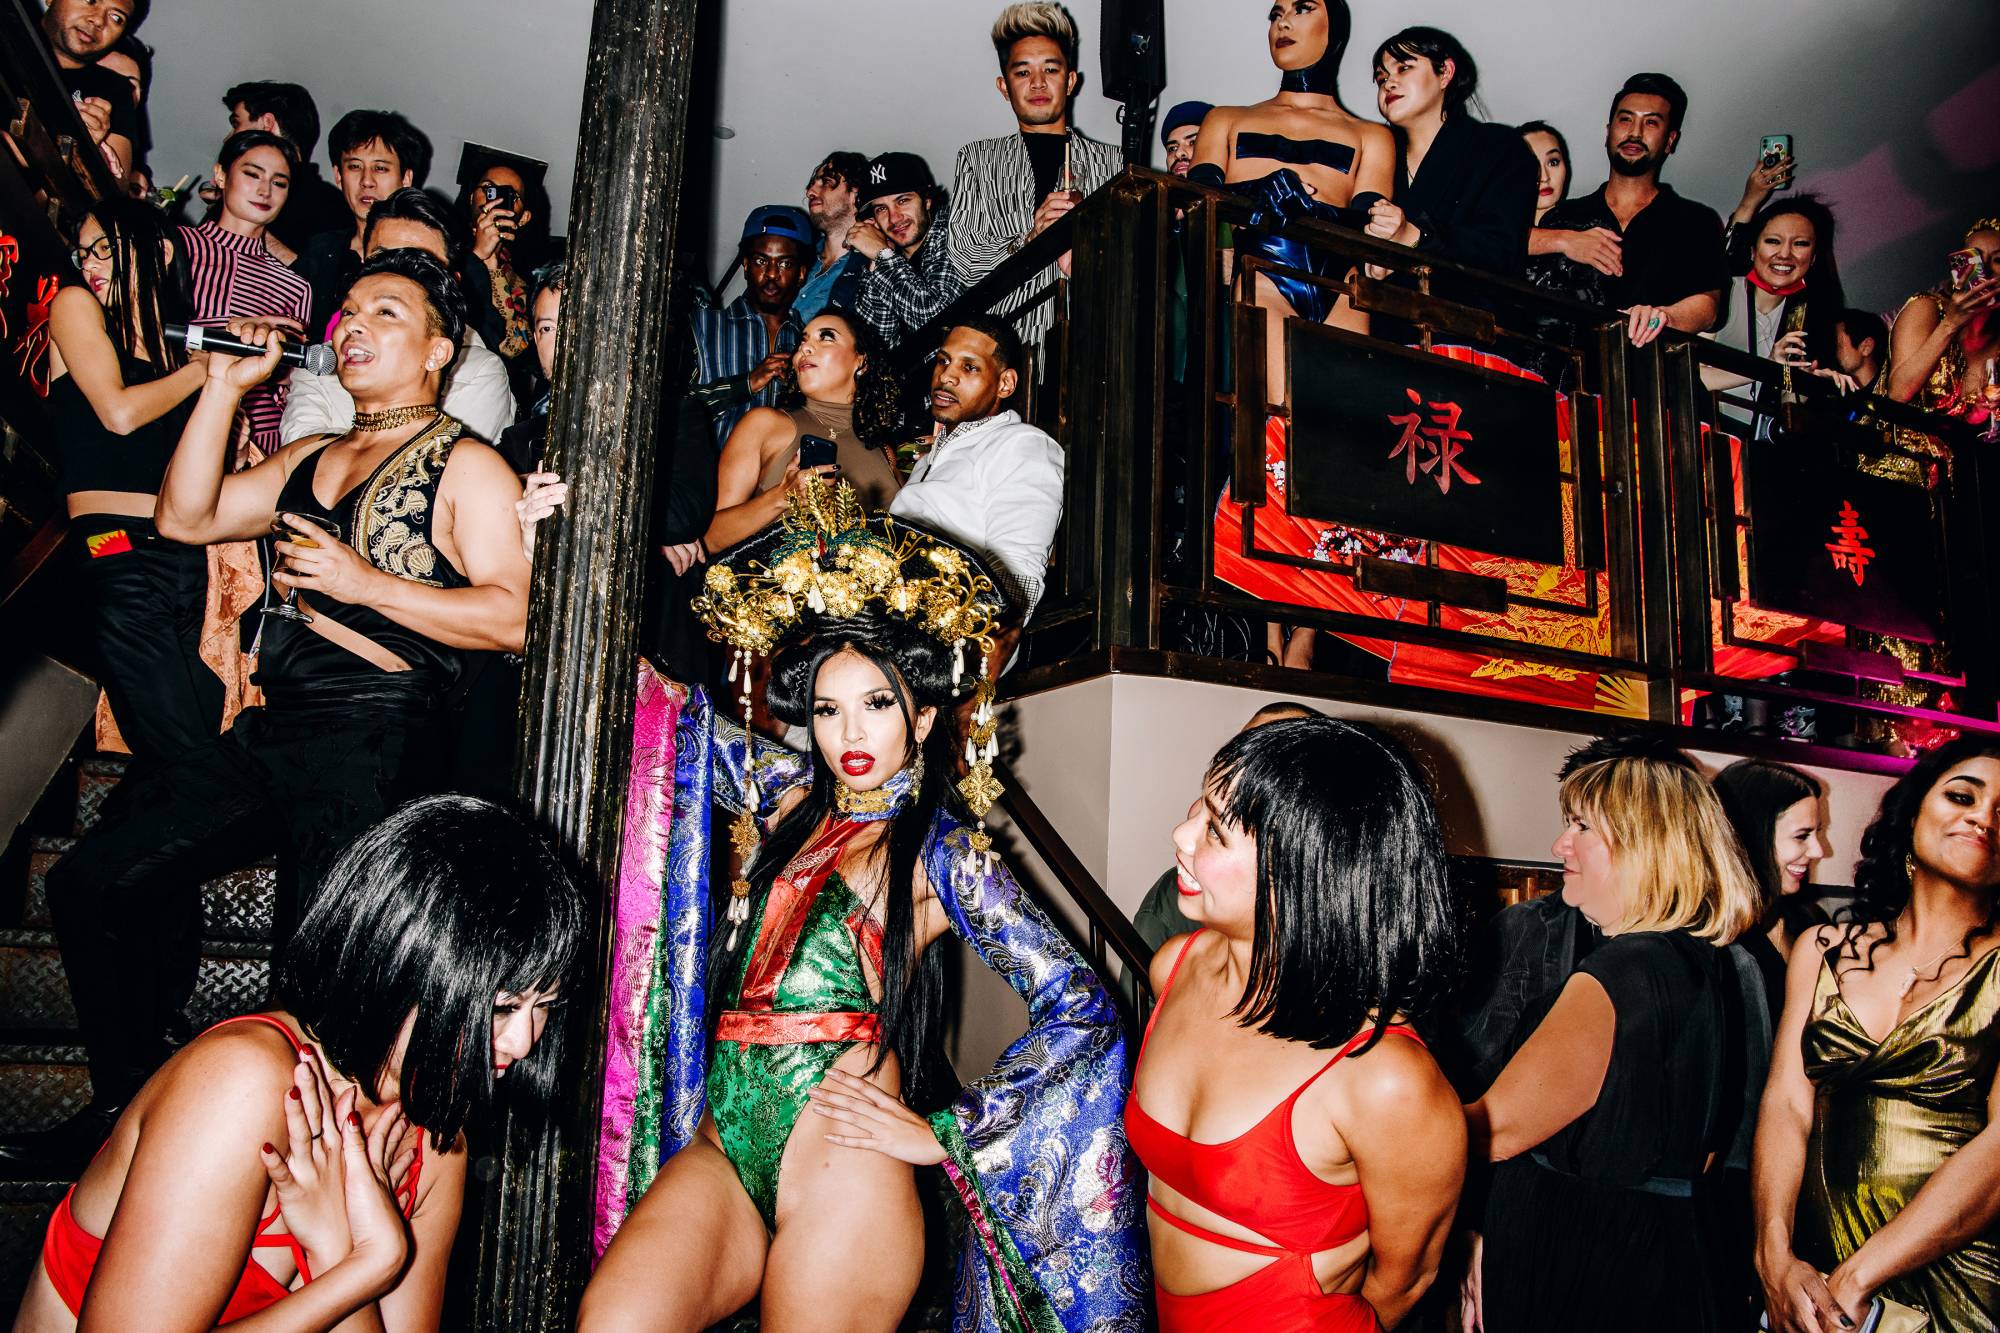 The Dance Party That Became a Queer Slaysian Celebration